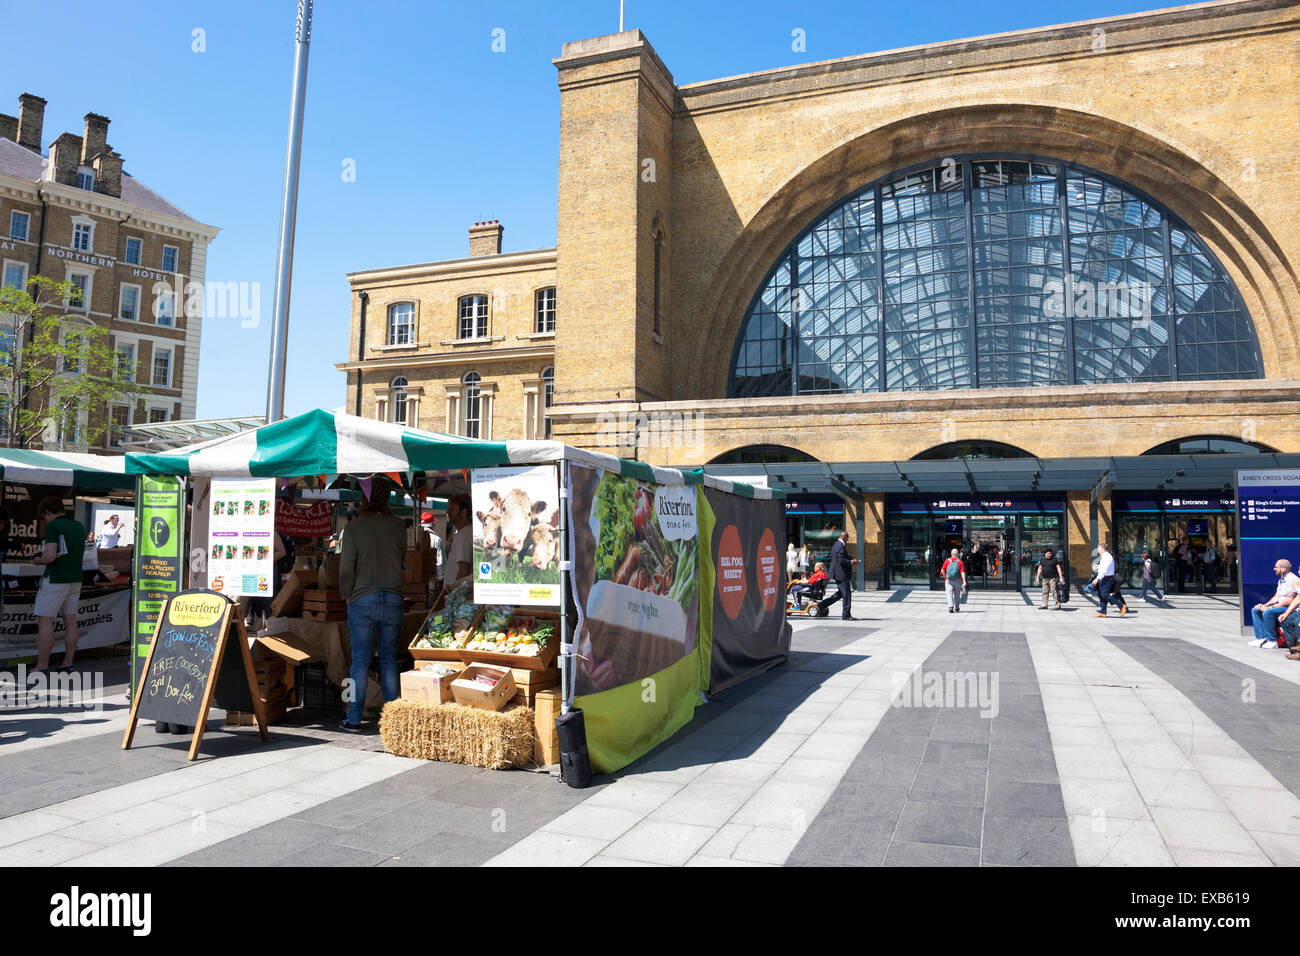 Real Food Market stalls in front of King's Cross station, London, England Stock Photo